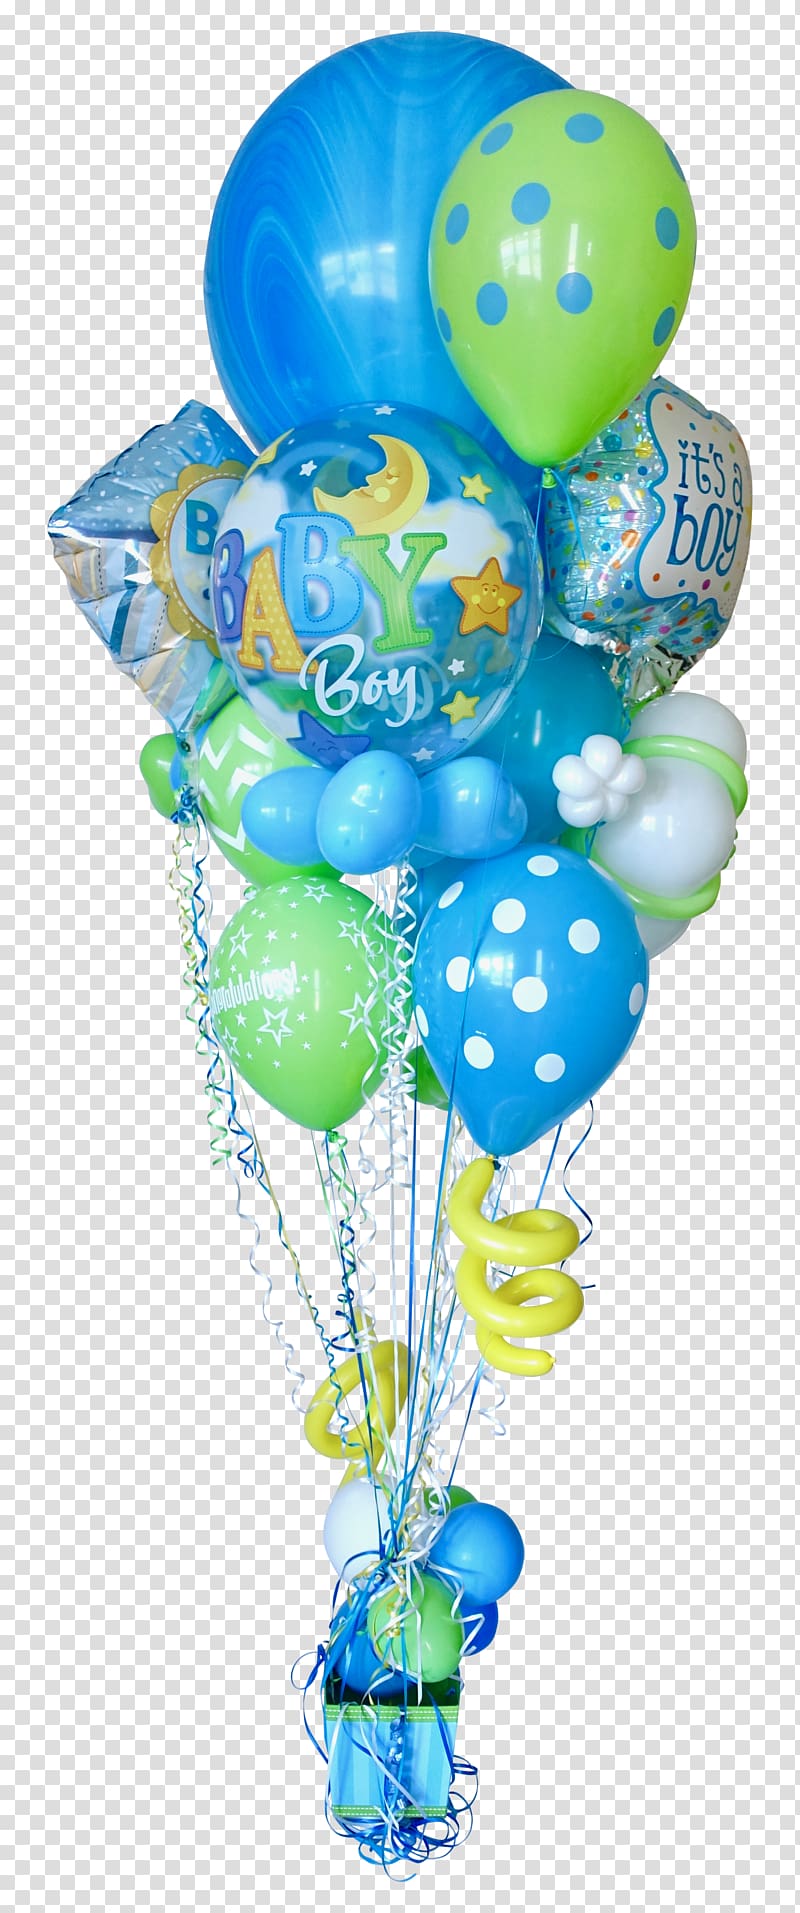 Toy Balloon Microsoft Azure Turquoise Party, its a boy transparent background PNG clipart